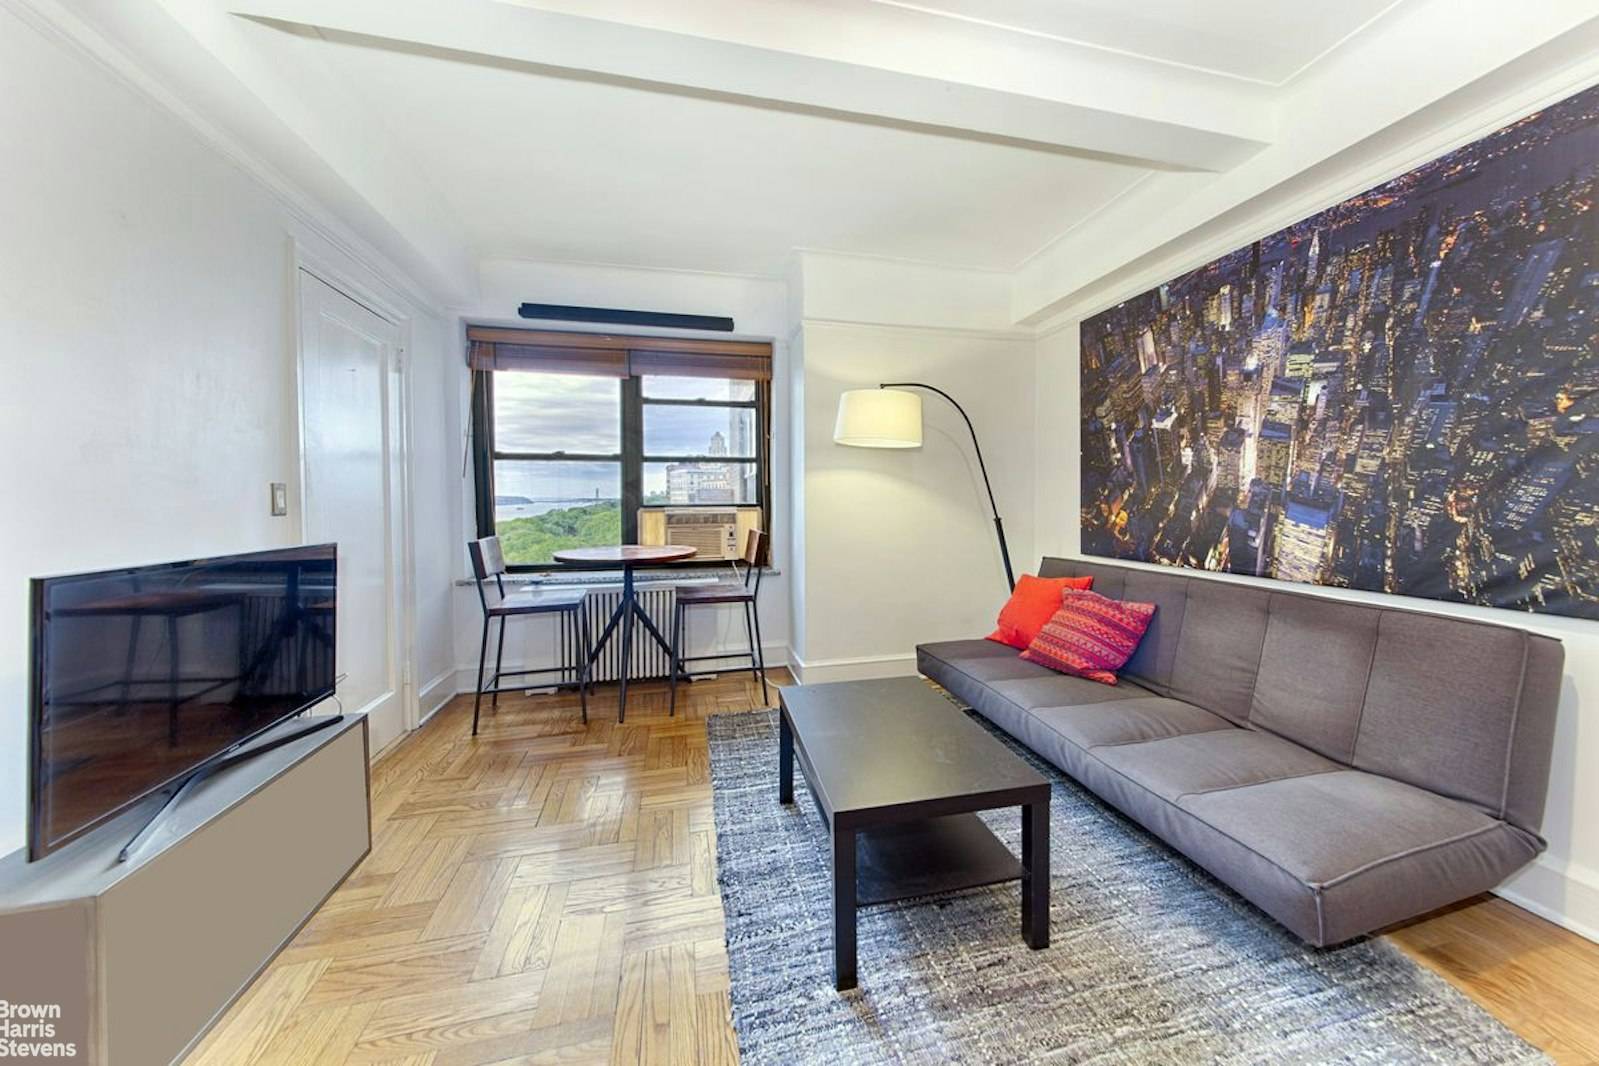 This quiet high floor studio is perfect for its flexible and expansive layout that can accomodate a generous living area, sleeping and home offcie space.